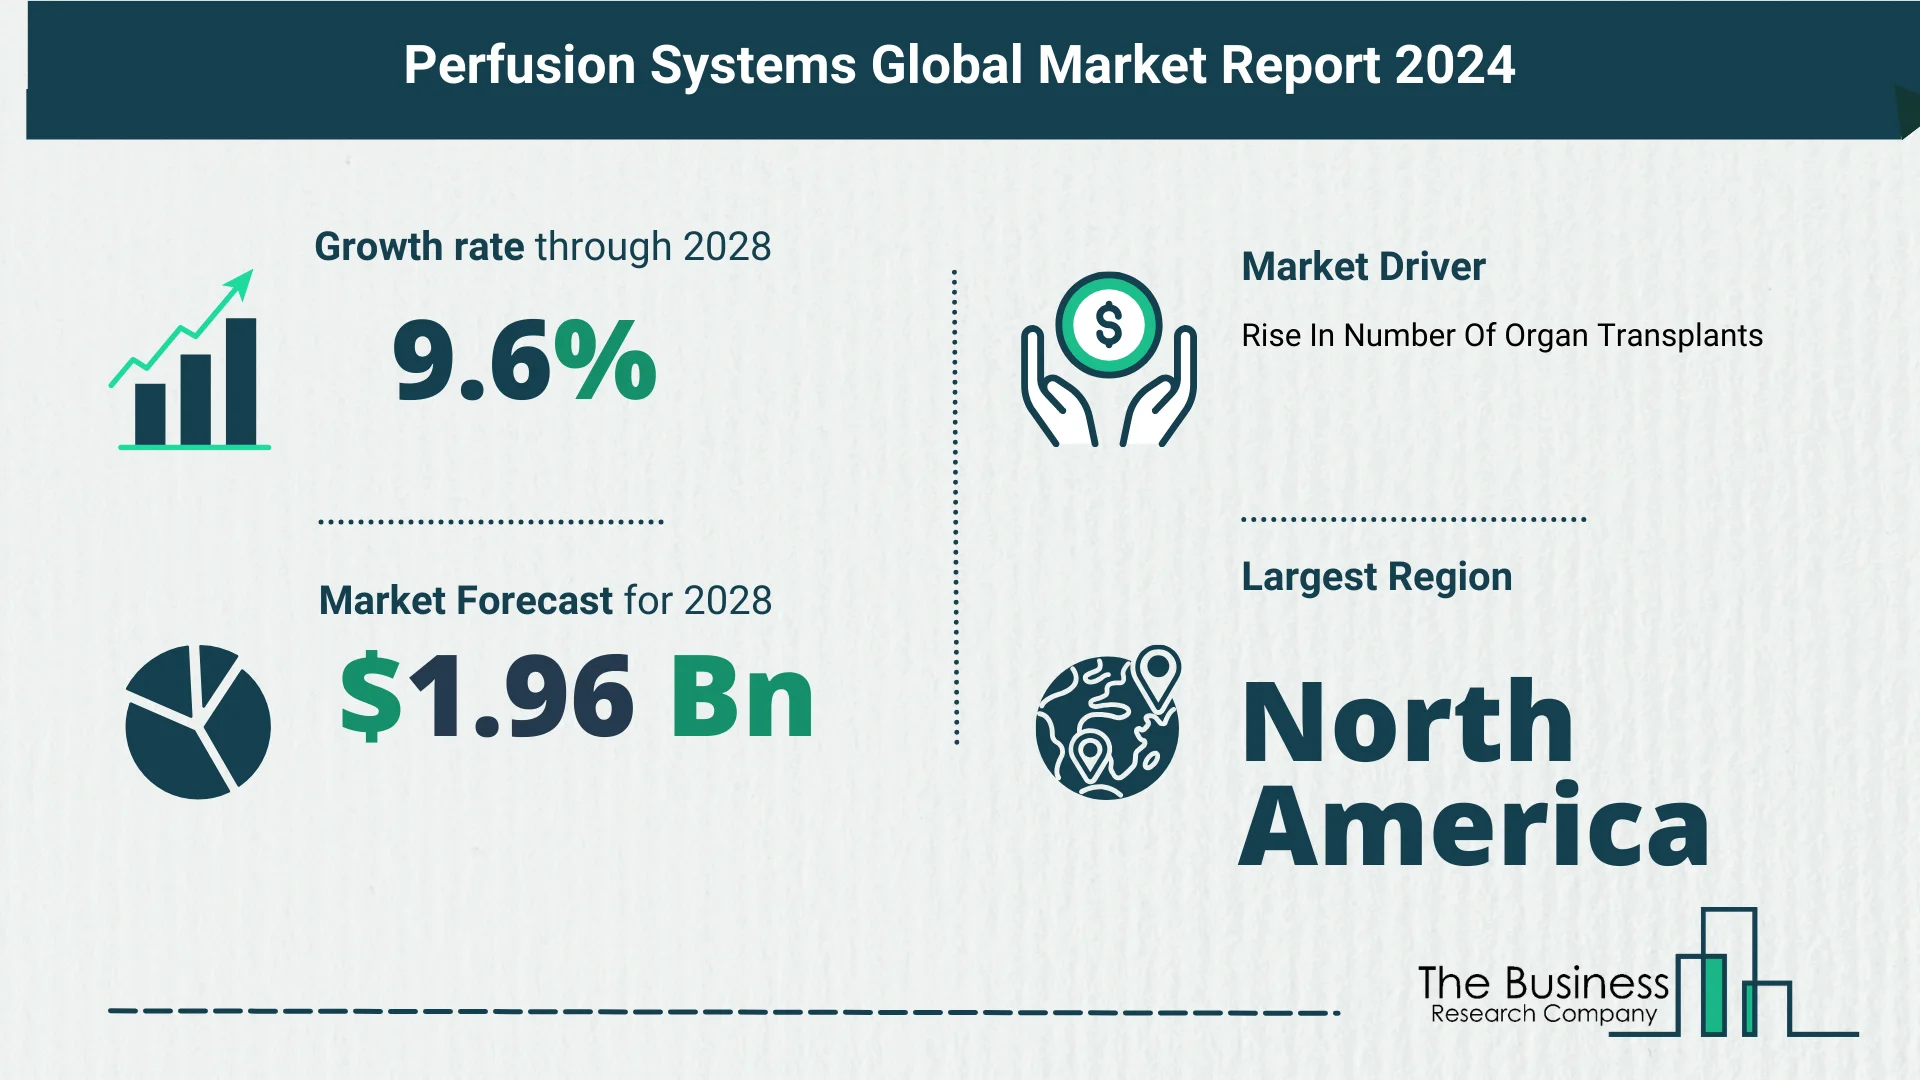 Top 5 Insights From The Perfusion Systems Market Report 2024